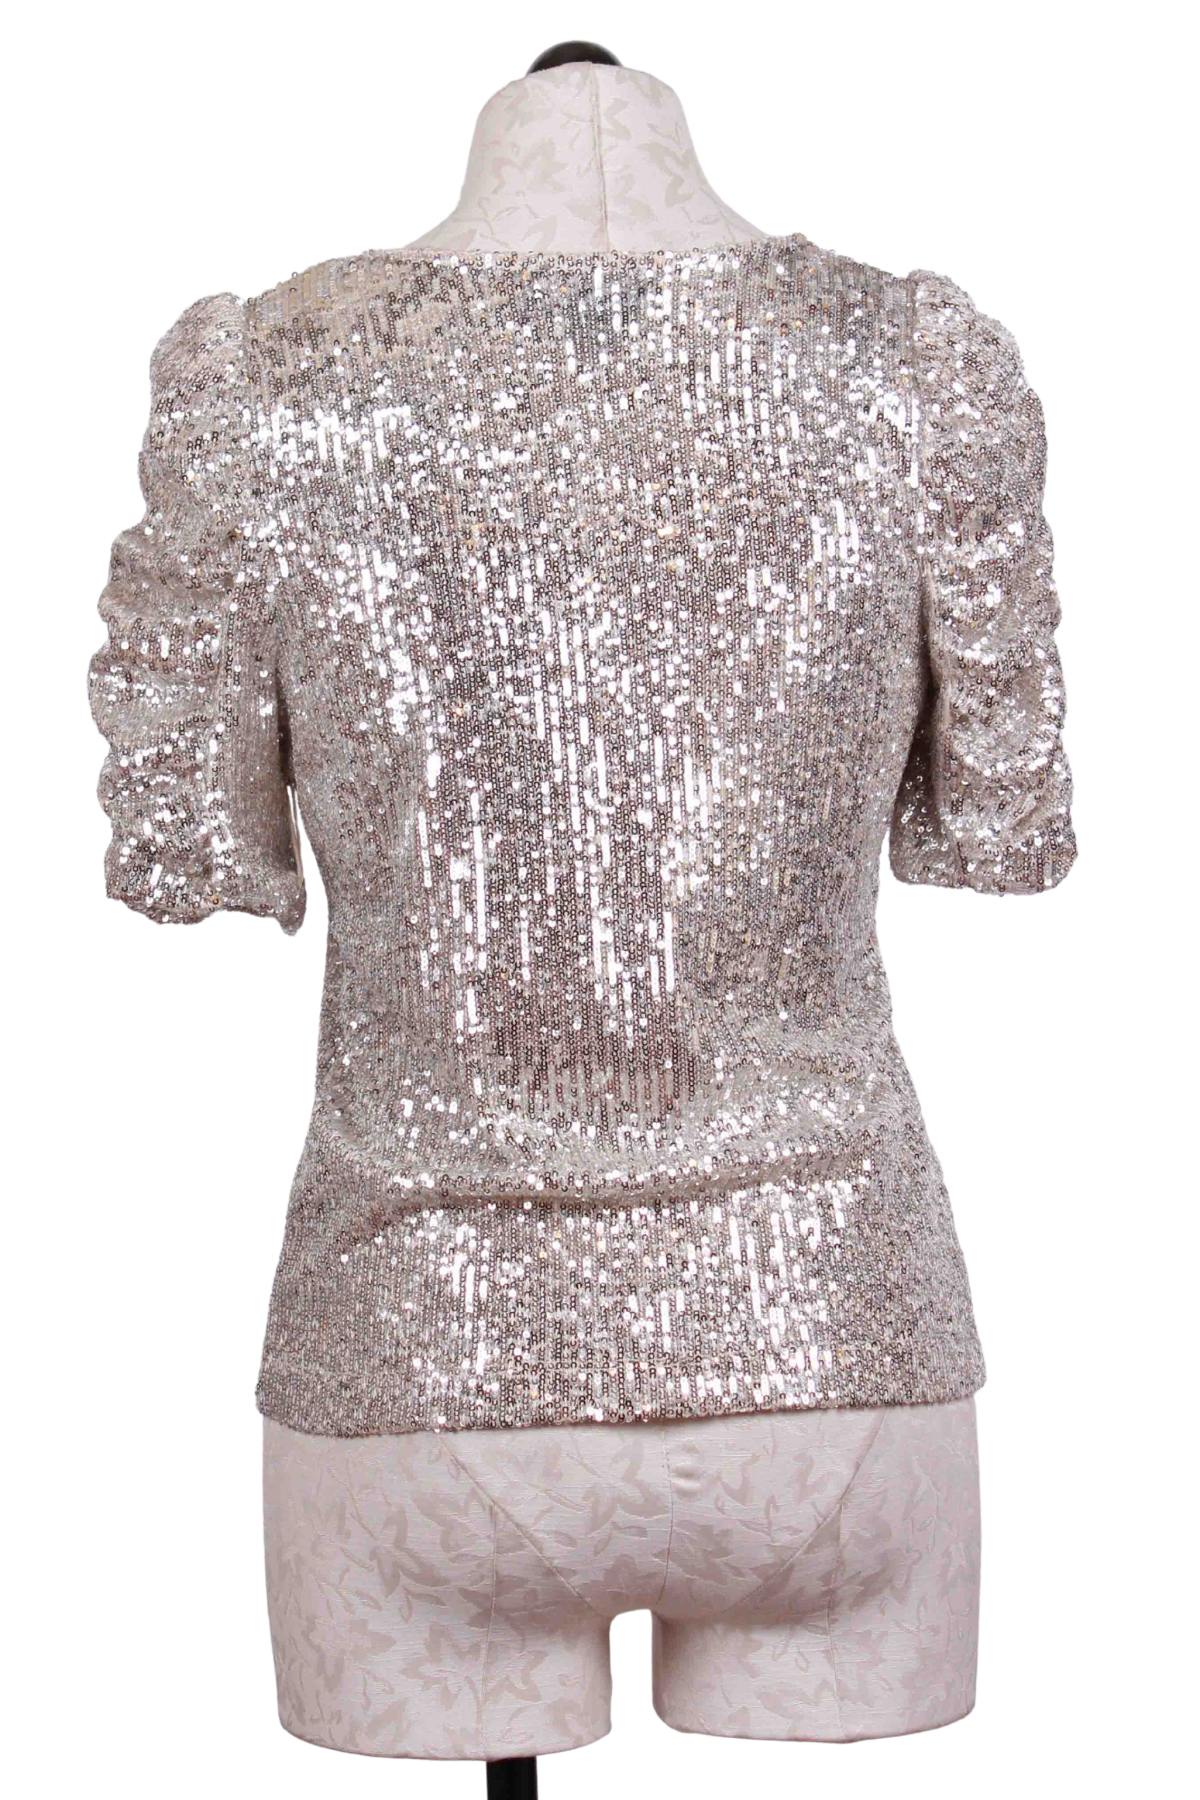 back view of Champagne Sequin Mesh Puff Sleeve Top by Fifteen Twenty